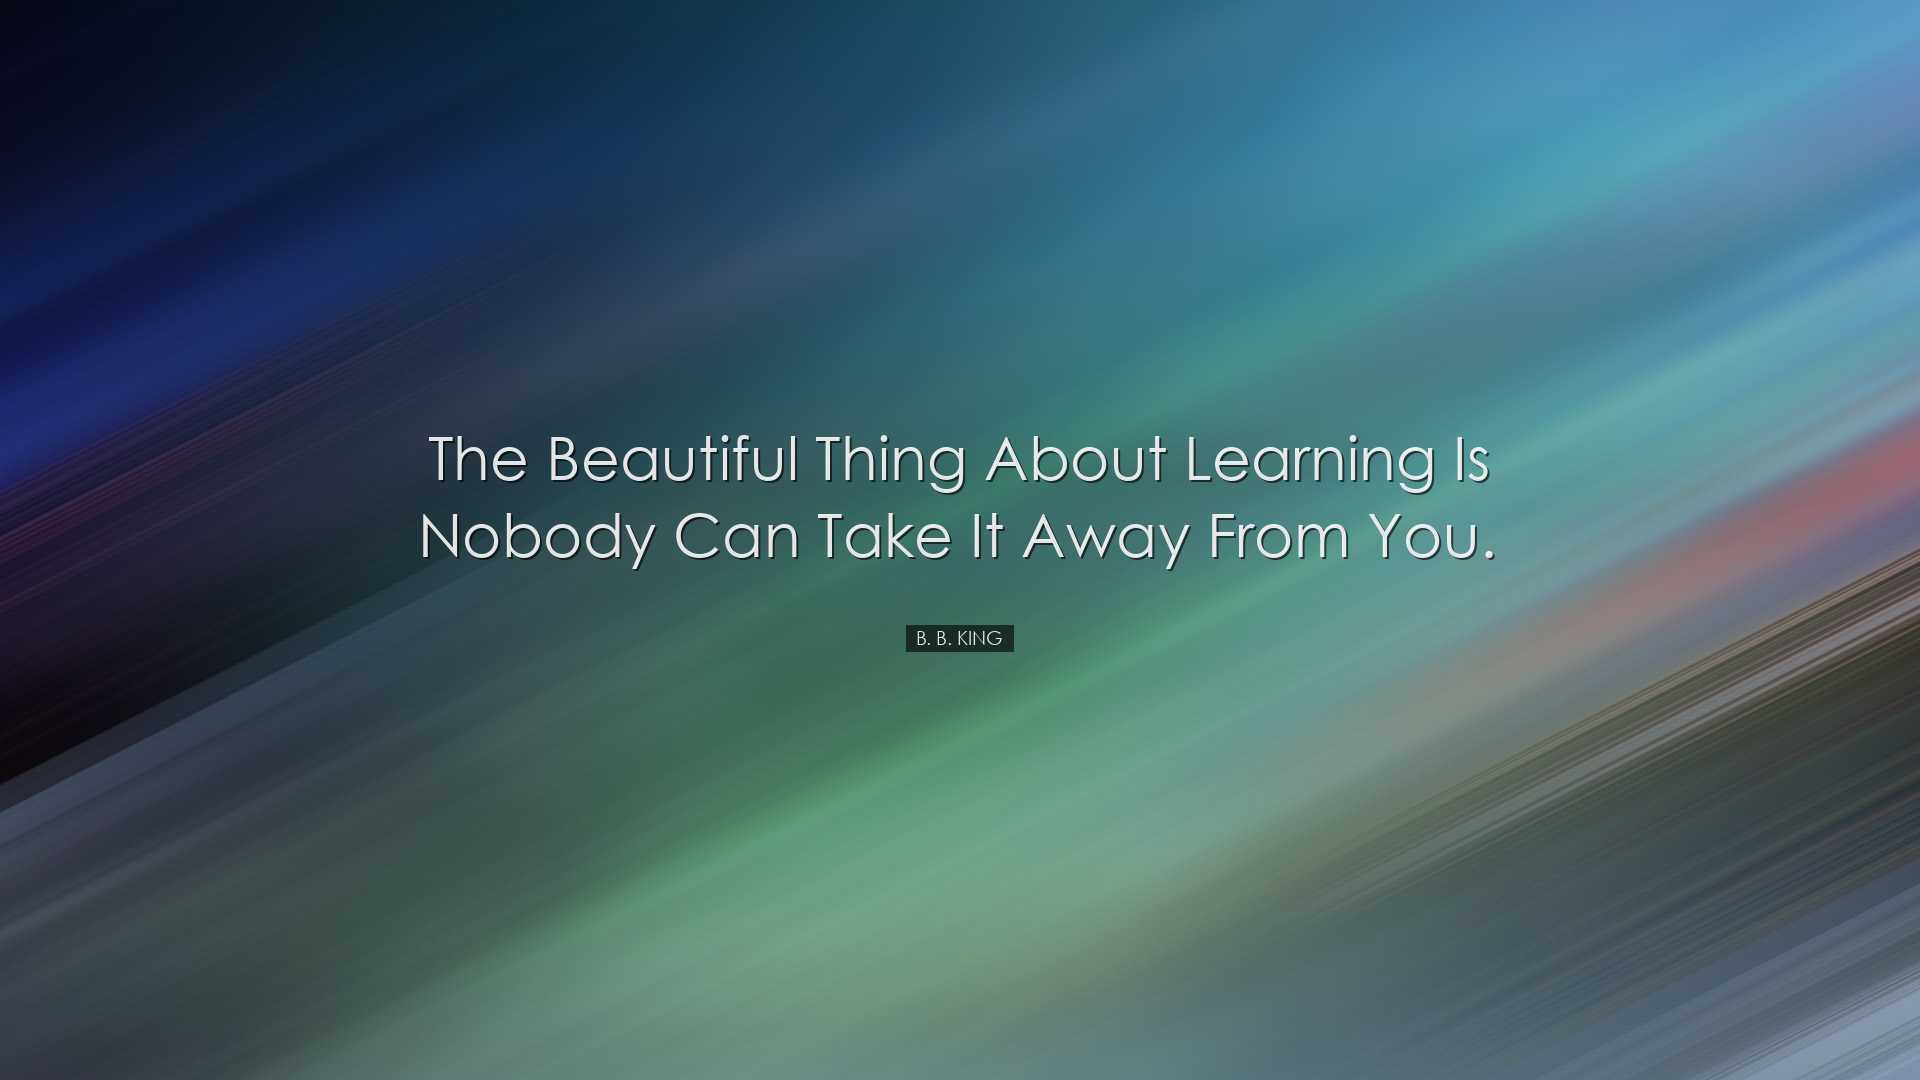 The beautiful thing about learning is nobody can take it away from